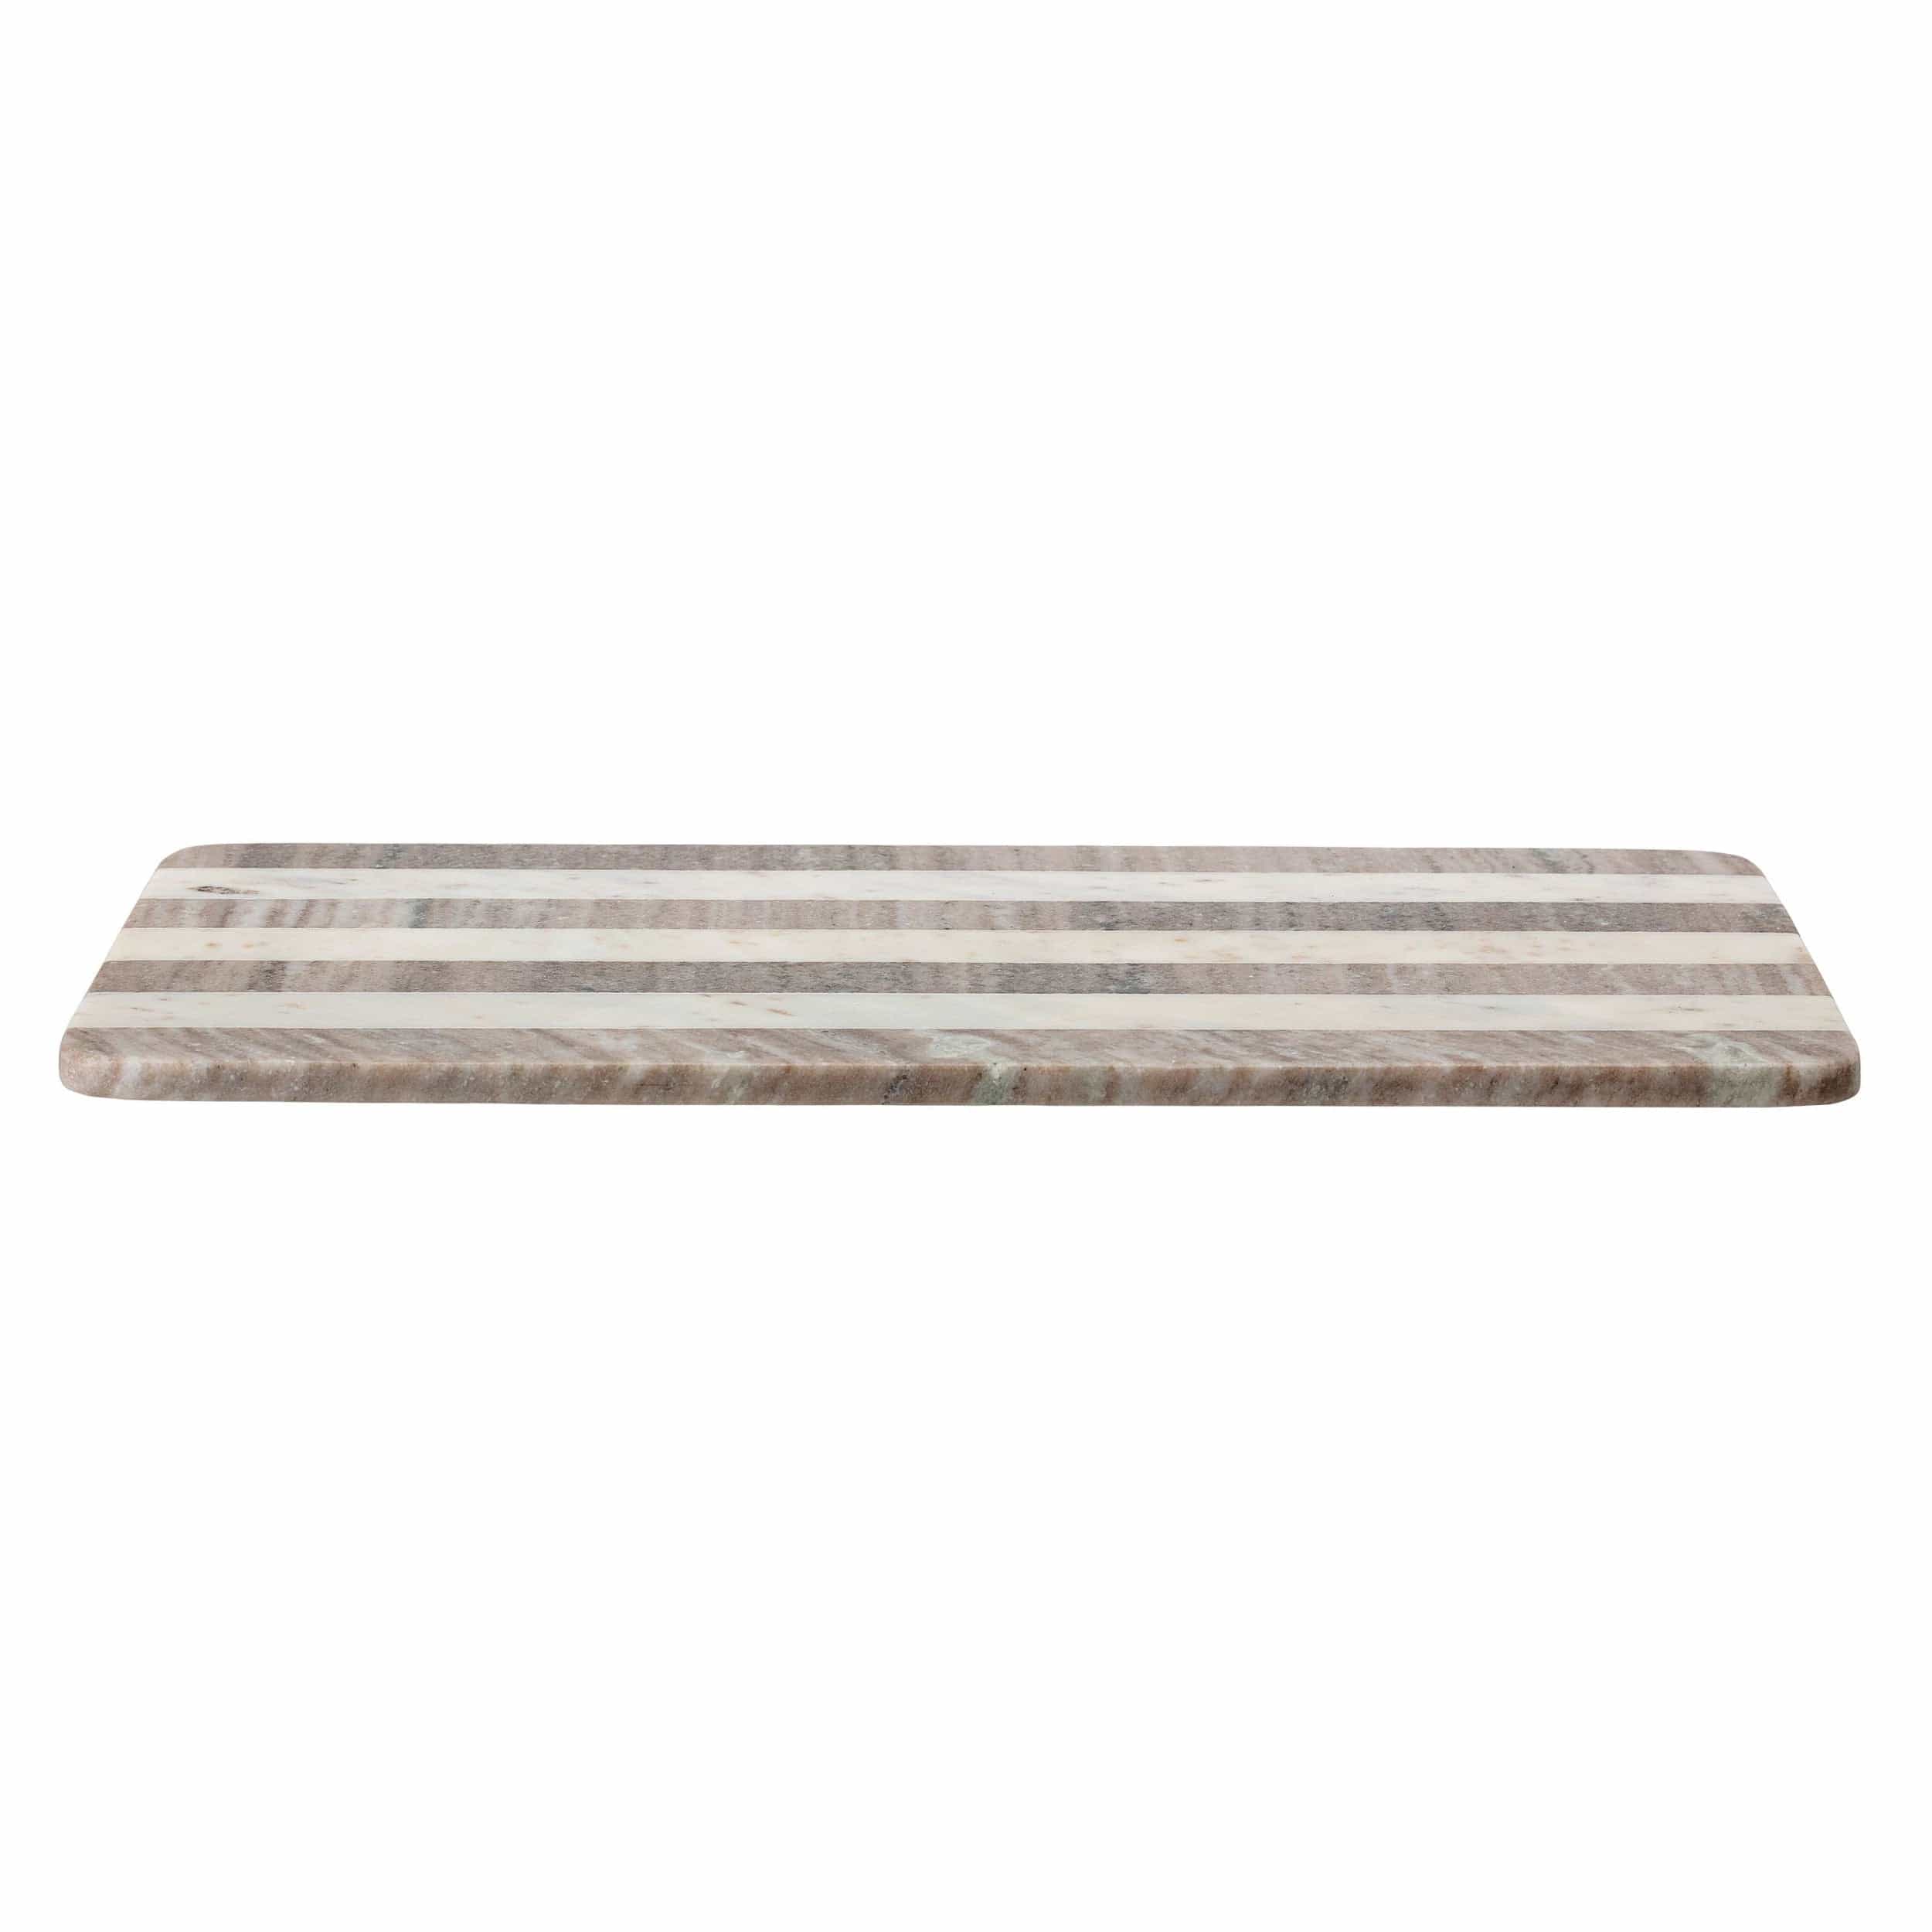 Bloomingville Bloomingville Striped Marble Cutting Board - Little Miss Muffin Children & Home